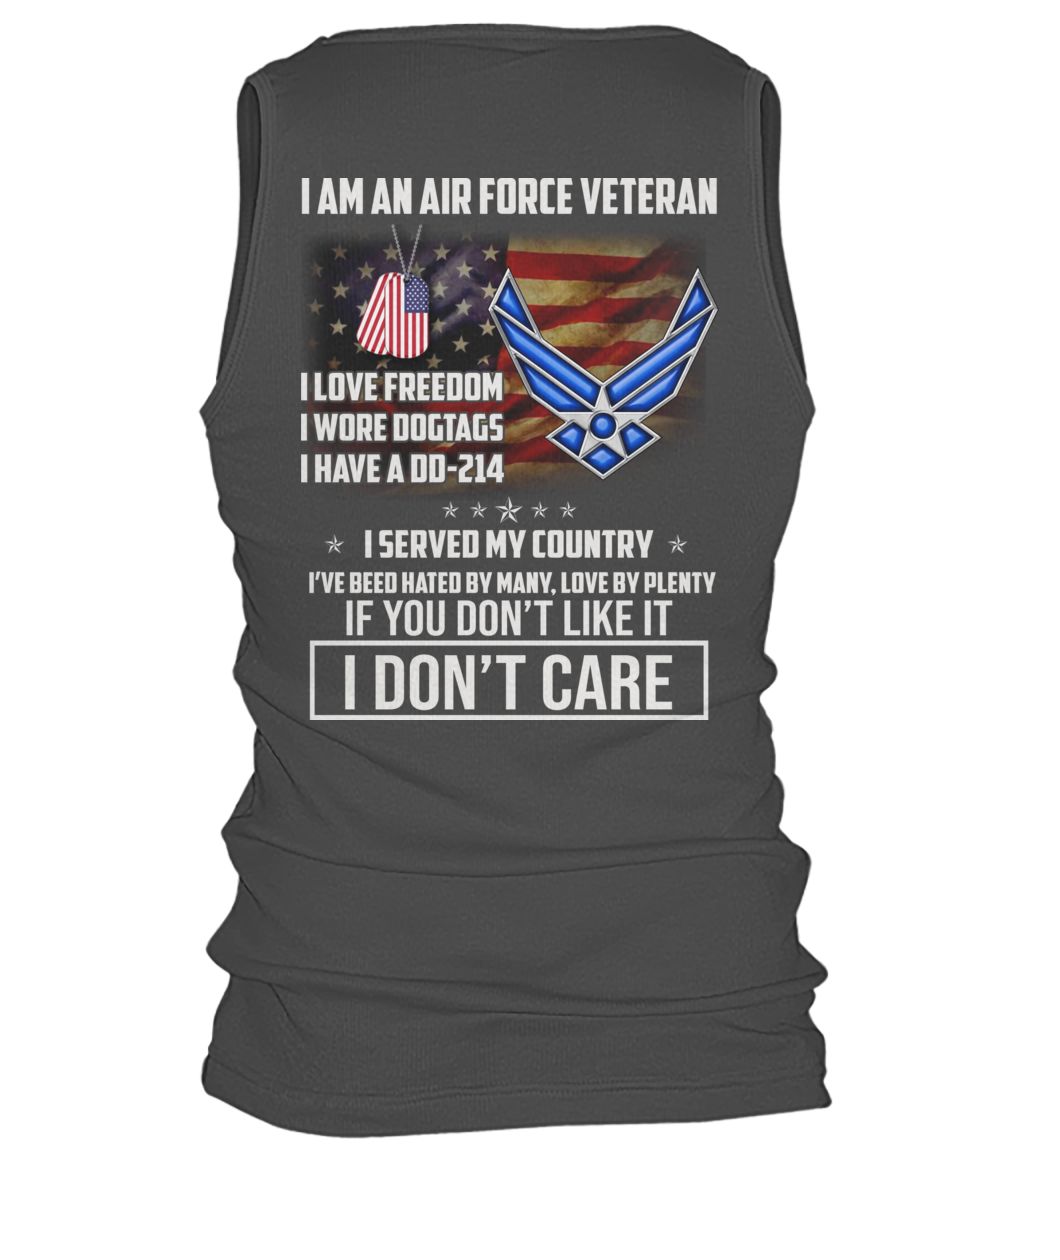 I am an air force veteran I love freedom I wore dogtags I have a DD-214 I served my country men's tank top